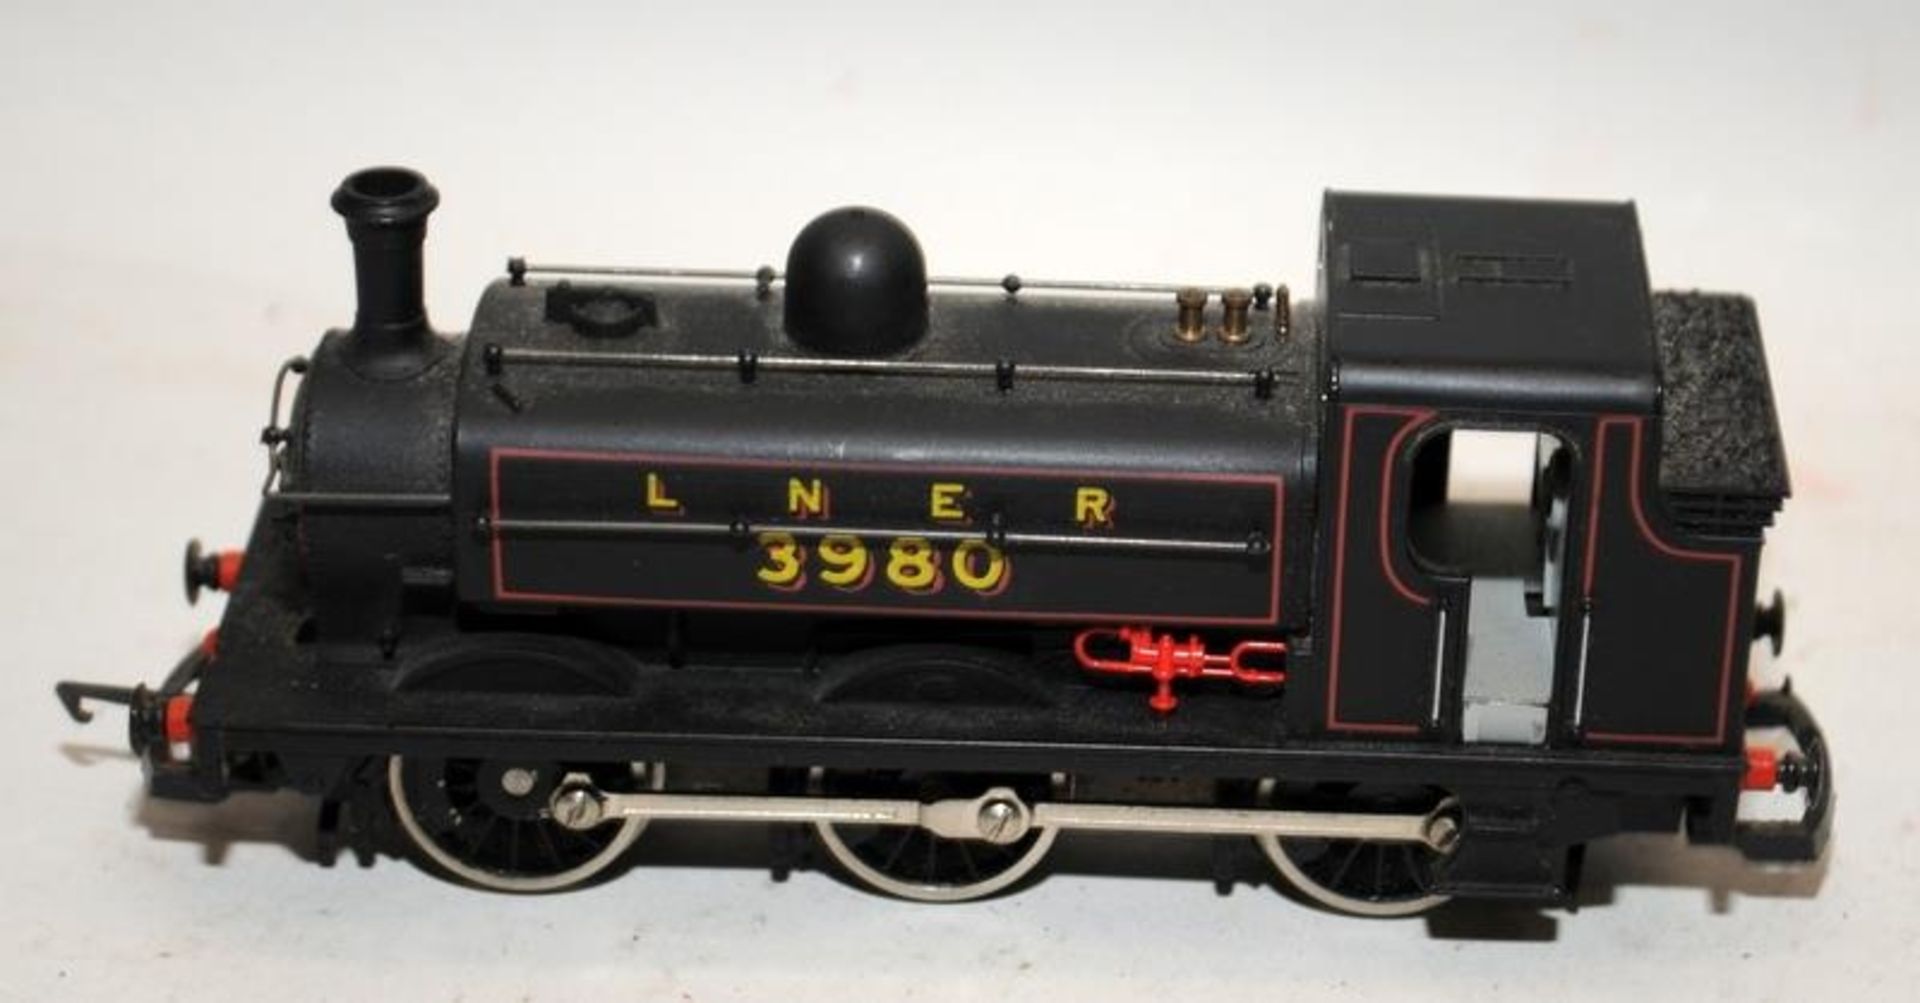 OO gauge locomotives to include Class 37 diesel William Cookworthy, LNER steam tank 3980 and - Image 2 of 3